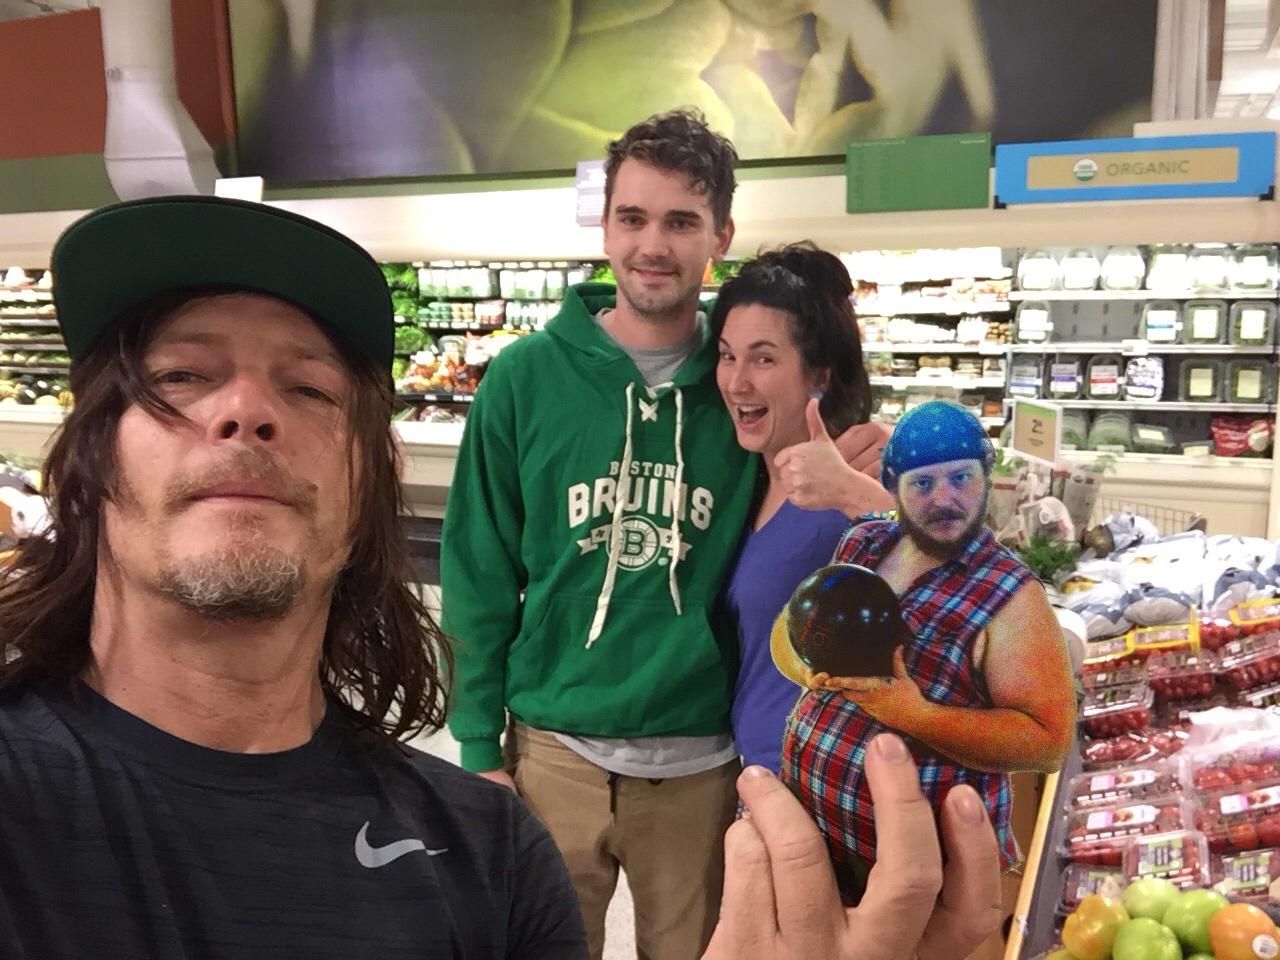 Saw Norman Reedus at Publix, he was holding an avocado. Instead, we photoshopped one of our friends.